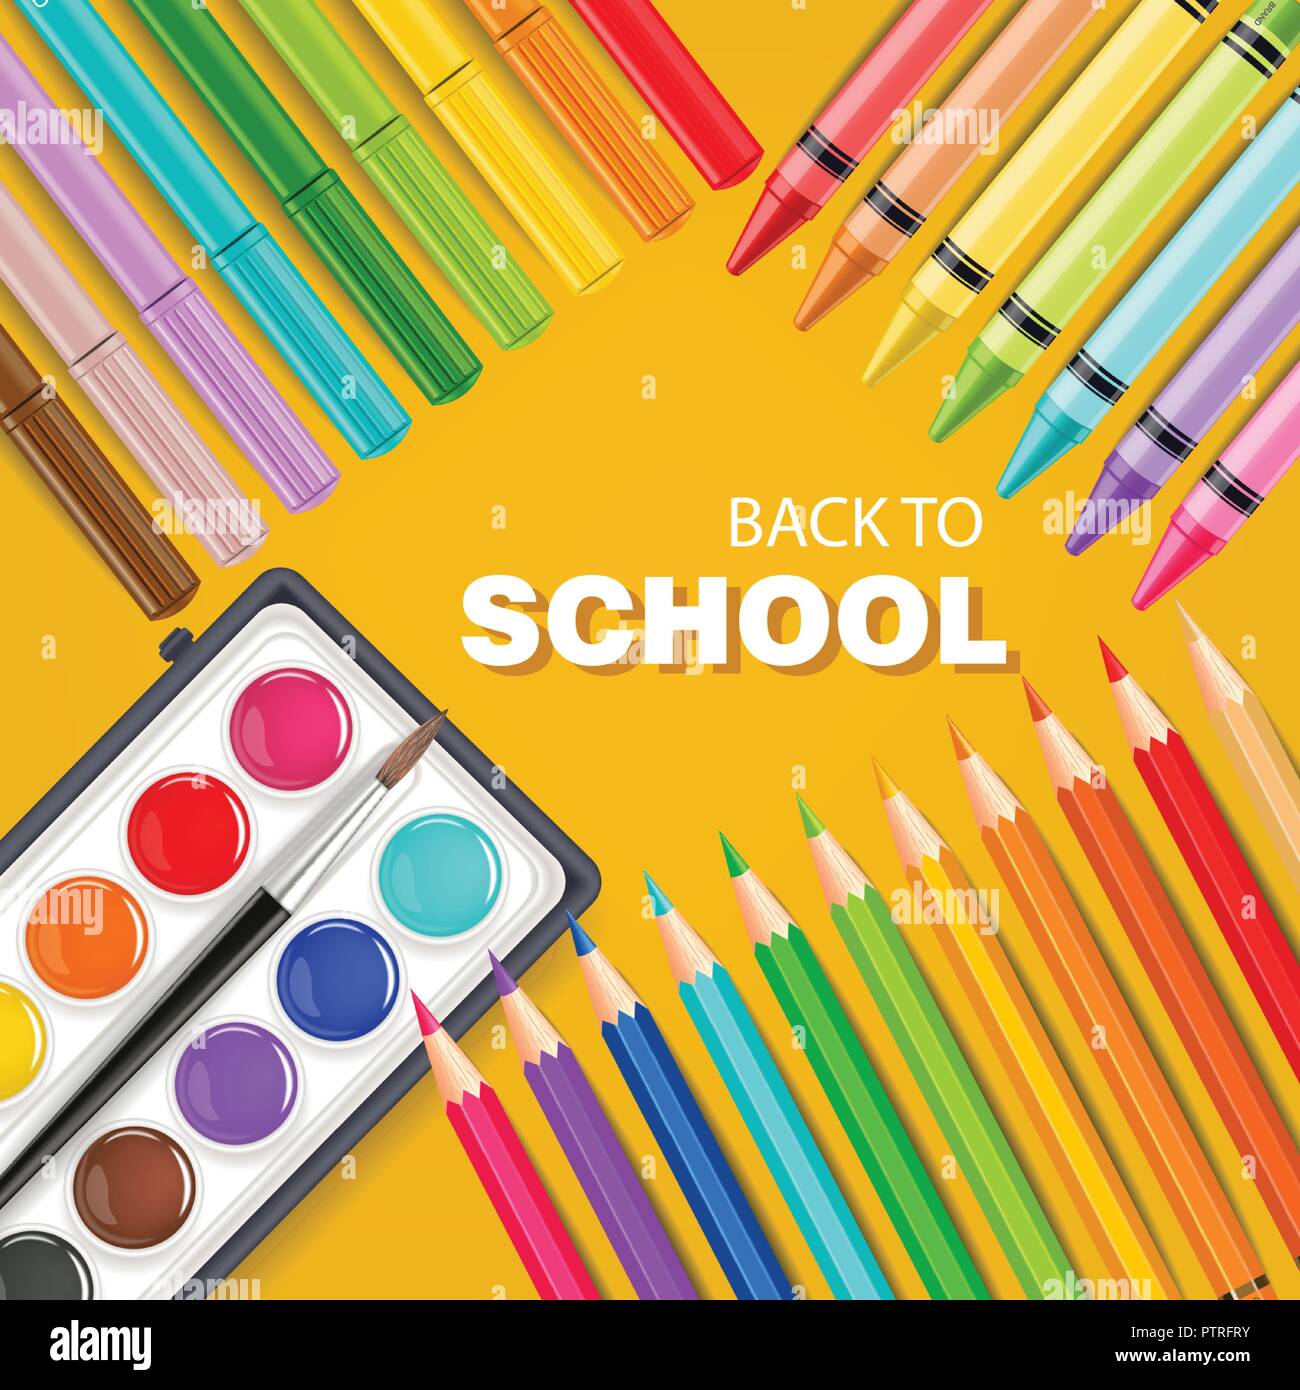 https://c8.alamy.com/comp/PTRFRY/back-to-school-card-with-colorful-pencils-markers-and-watercolor-palette-vector-illustration-PTRFRY.jpg